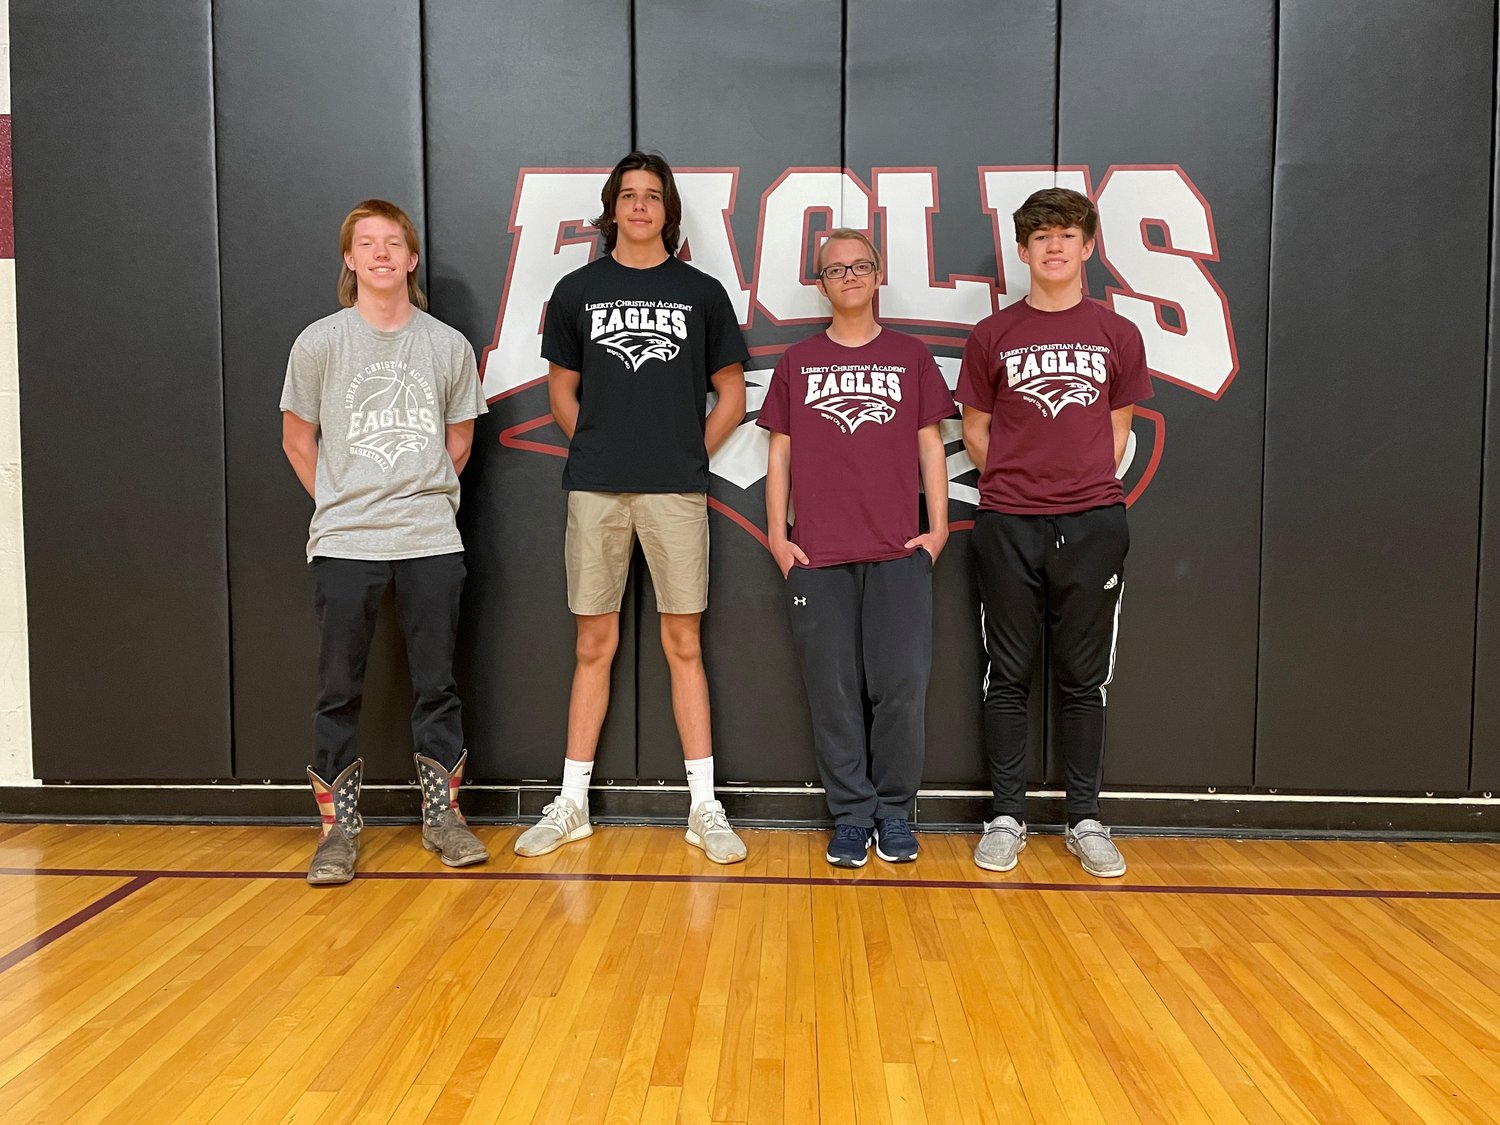 Liberty Christian Academy started a boys golf team this year. Pictured, from left, are Caleb Schneider, Jed Moss, Zack Thiele, Jack Duvel. Not pictured: Zack Dames.